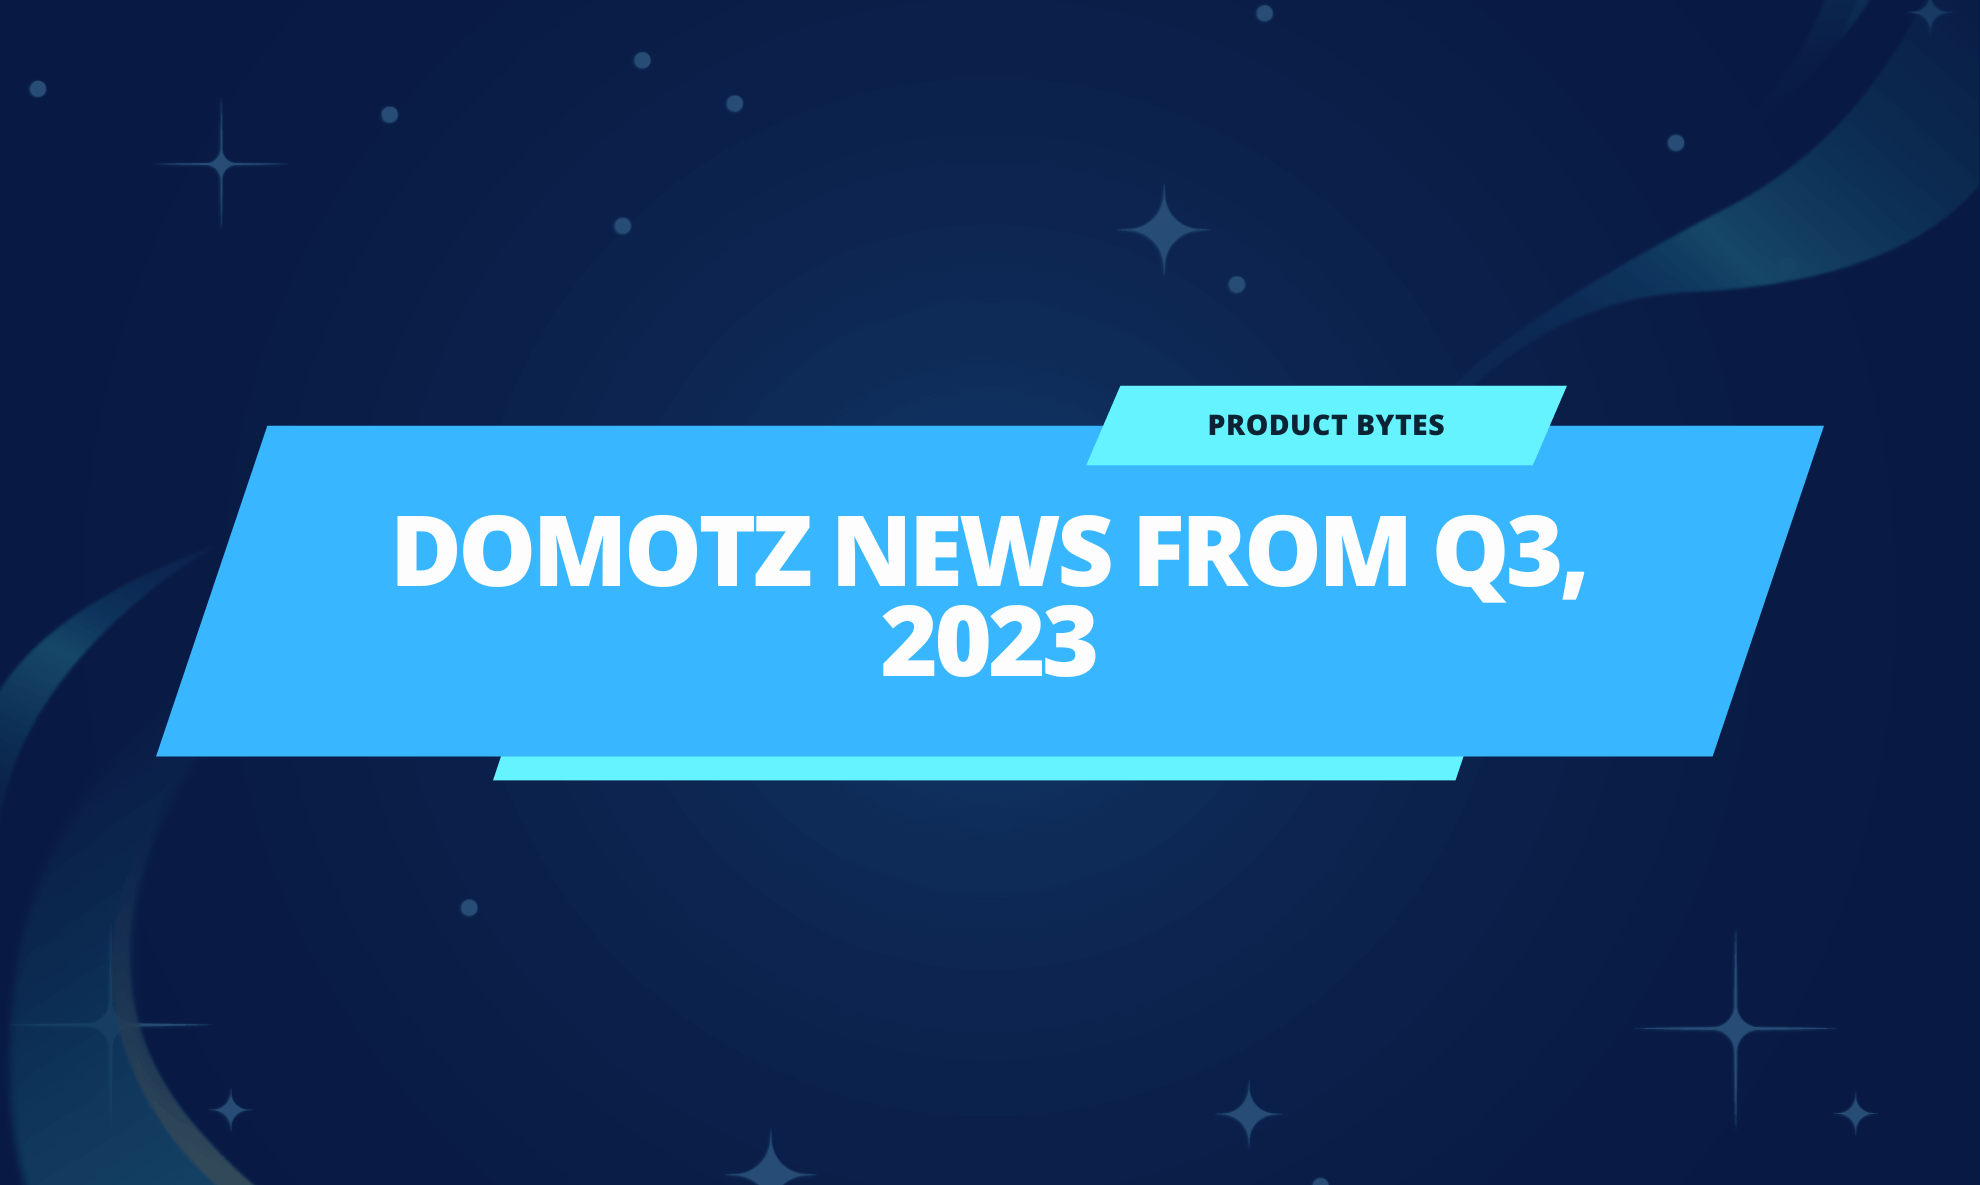 Domotz News from Q3 (July to September) 2023